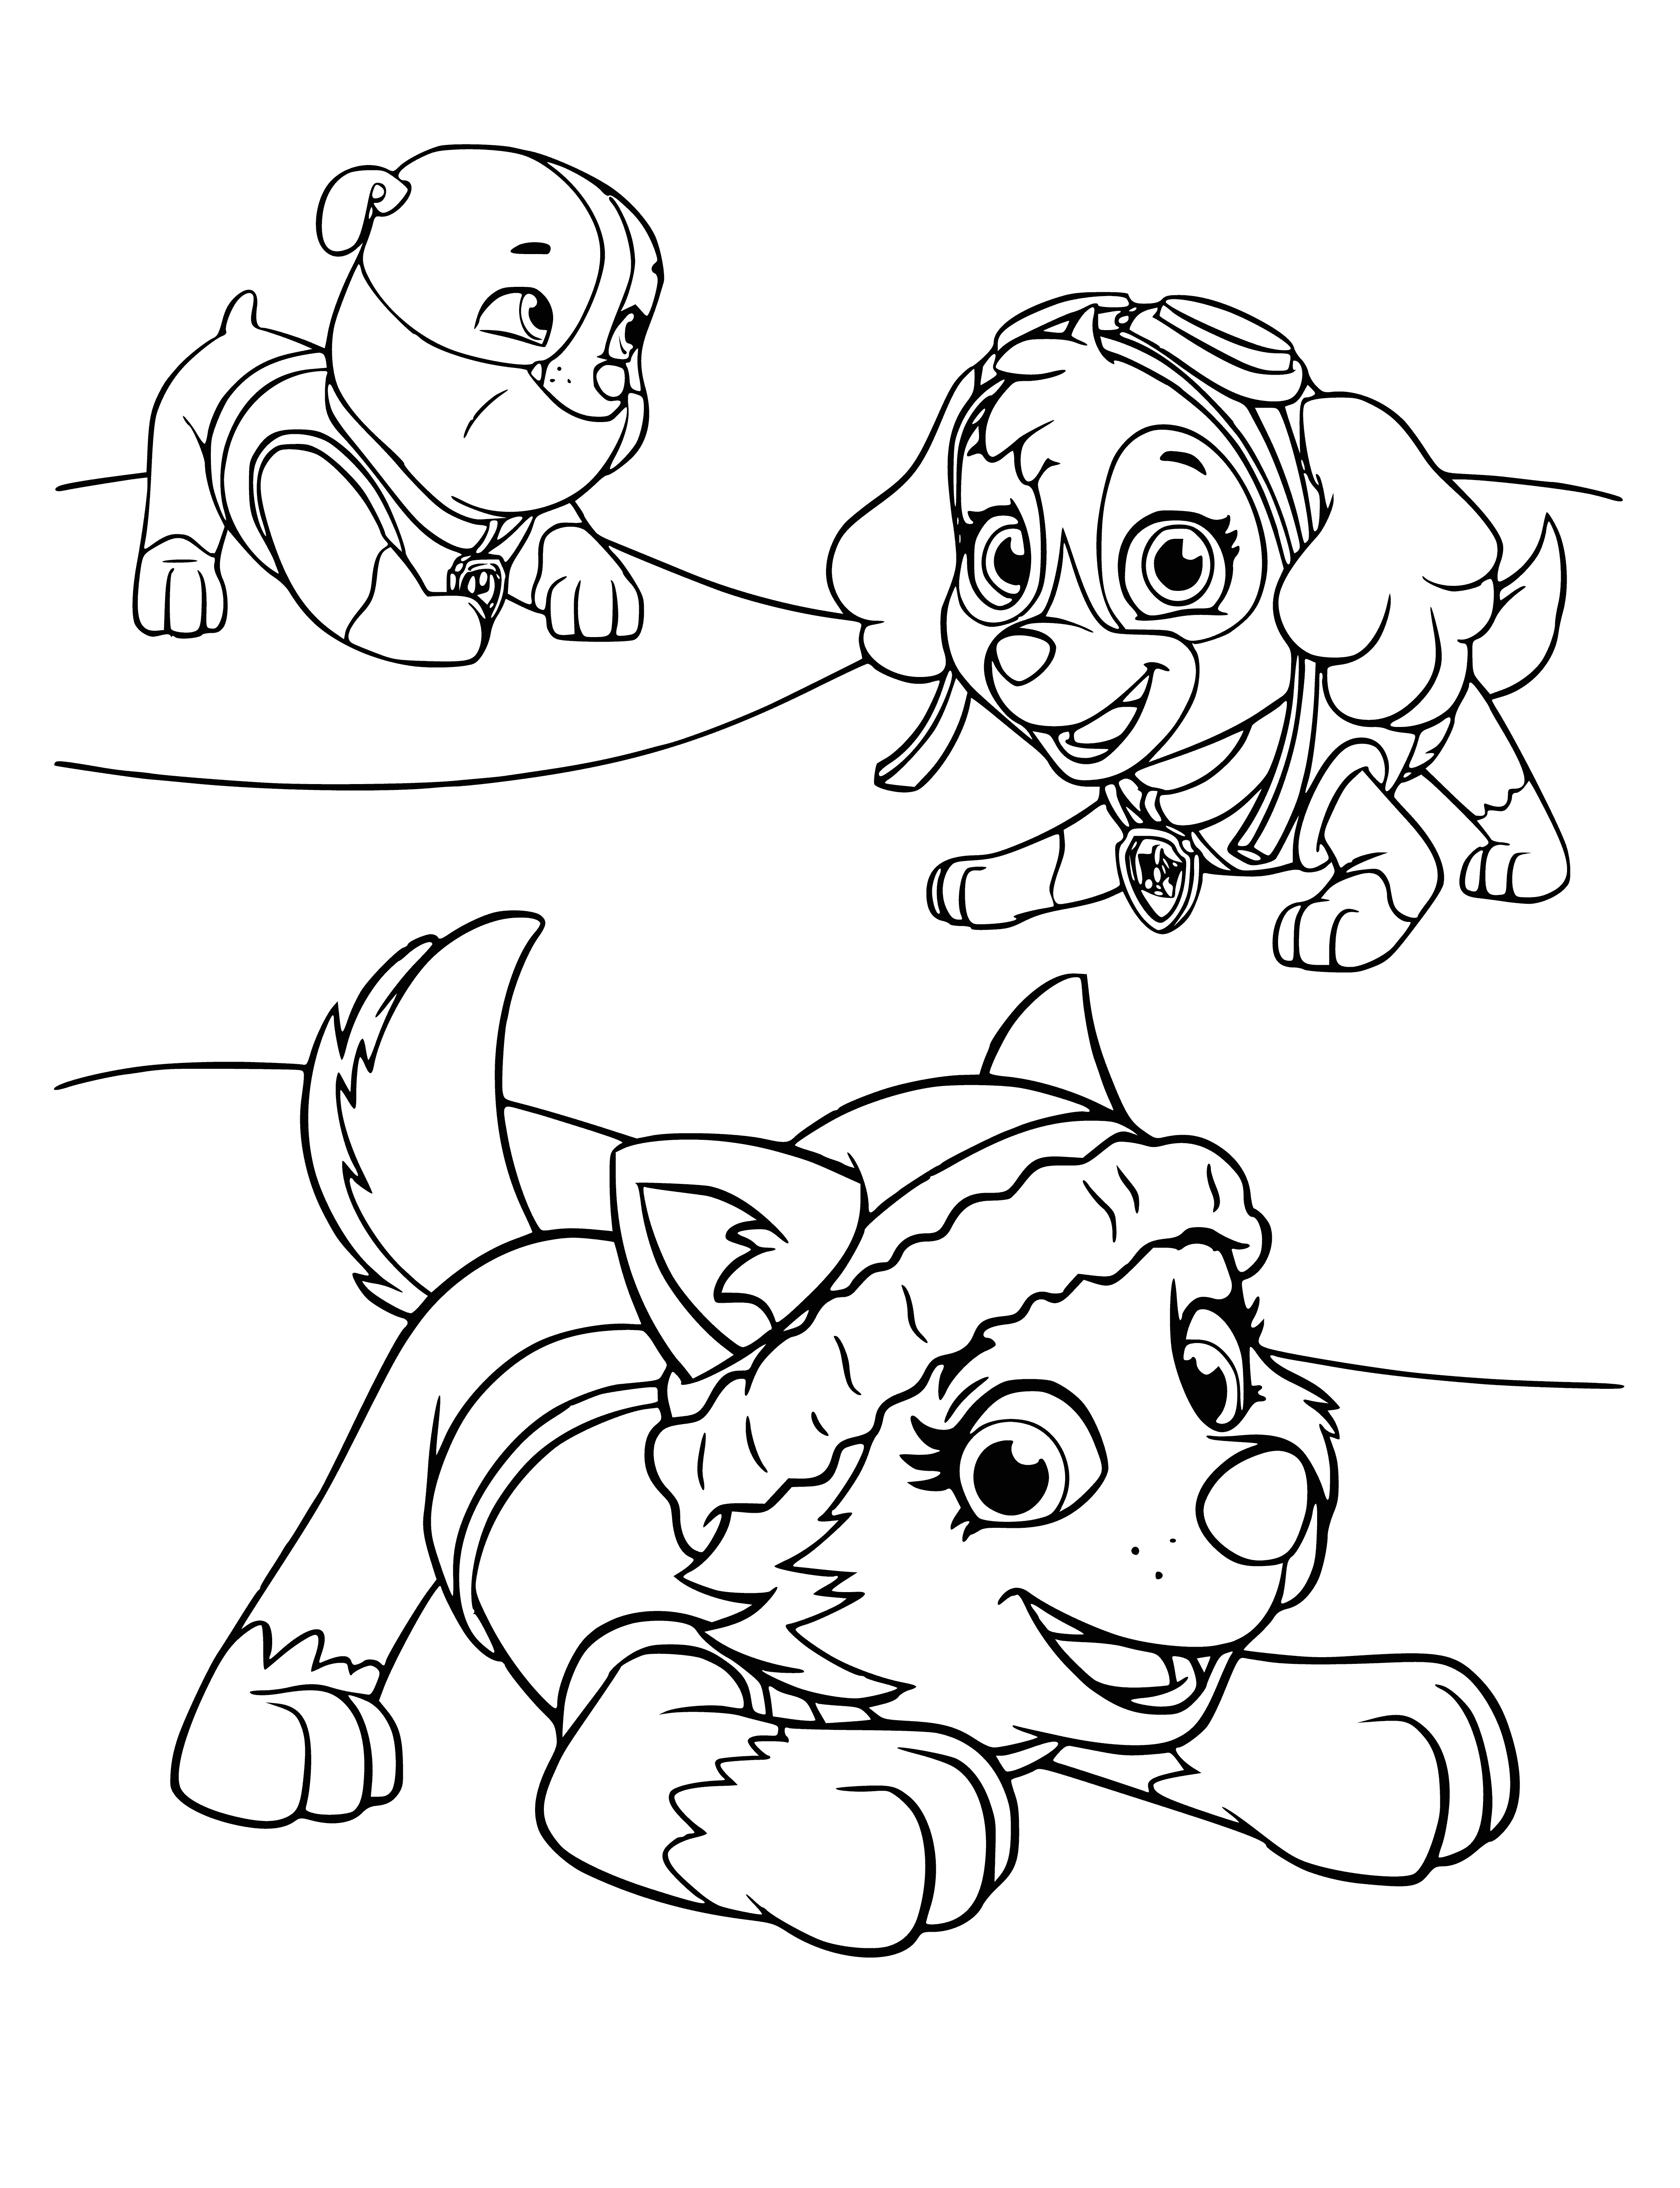 coloring page: 3 dogs of different colors stand on hind legs w/ front paws in the air, each holding diff. items in their mouths: dumbbell, ribbon, & Frisbee.